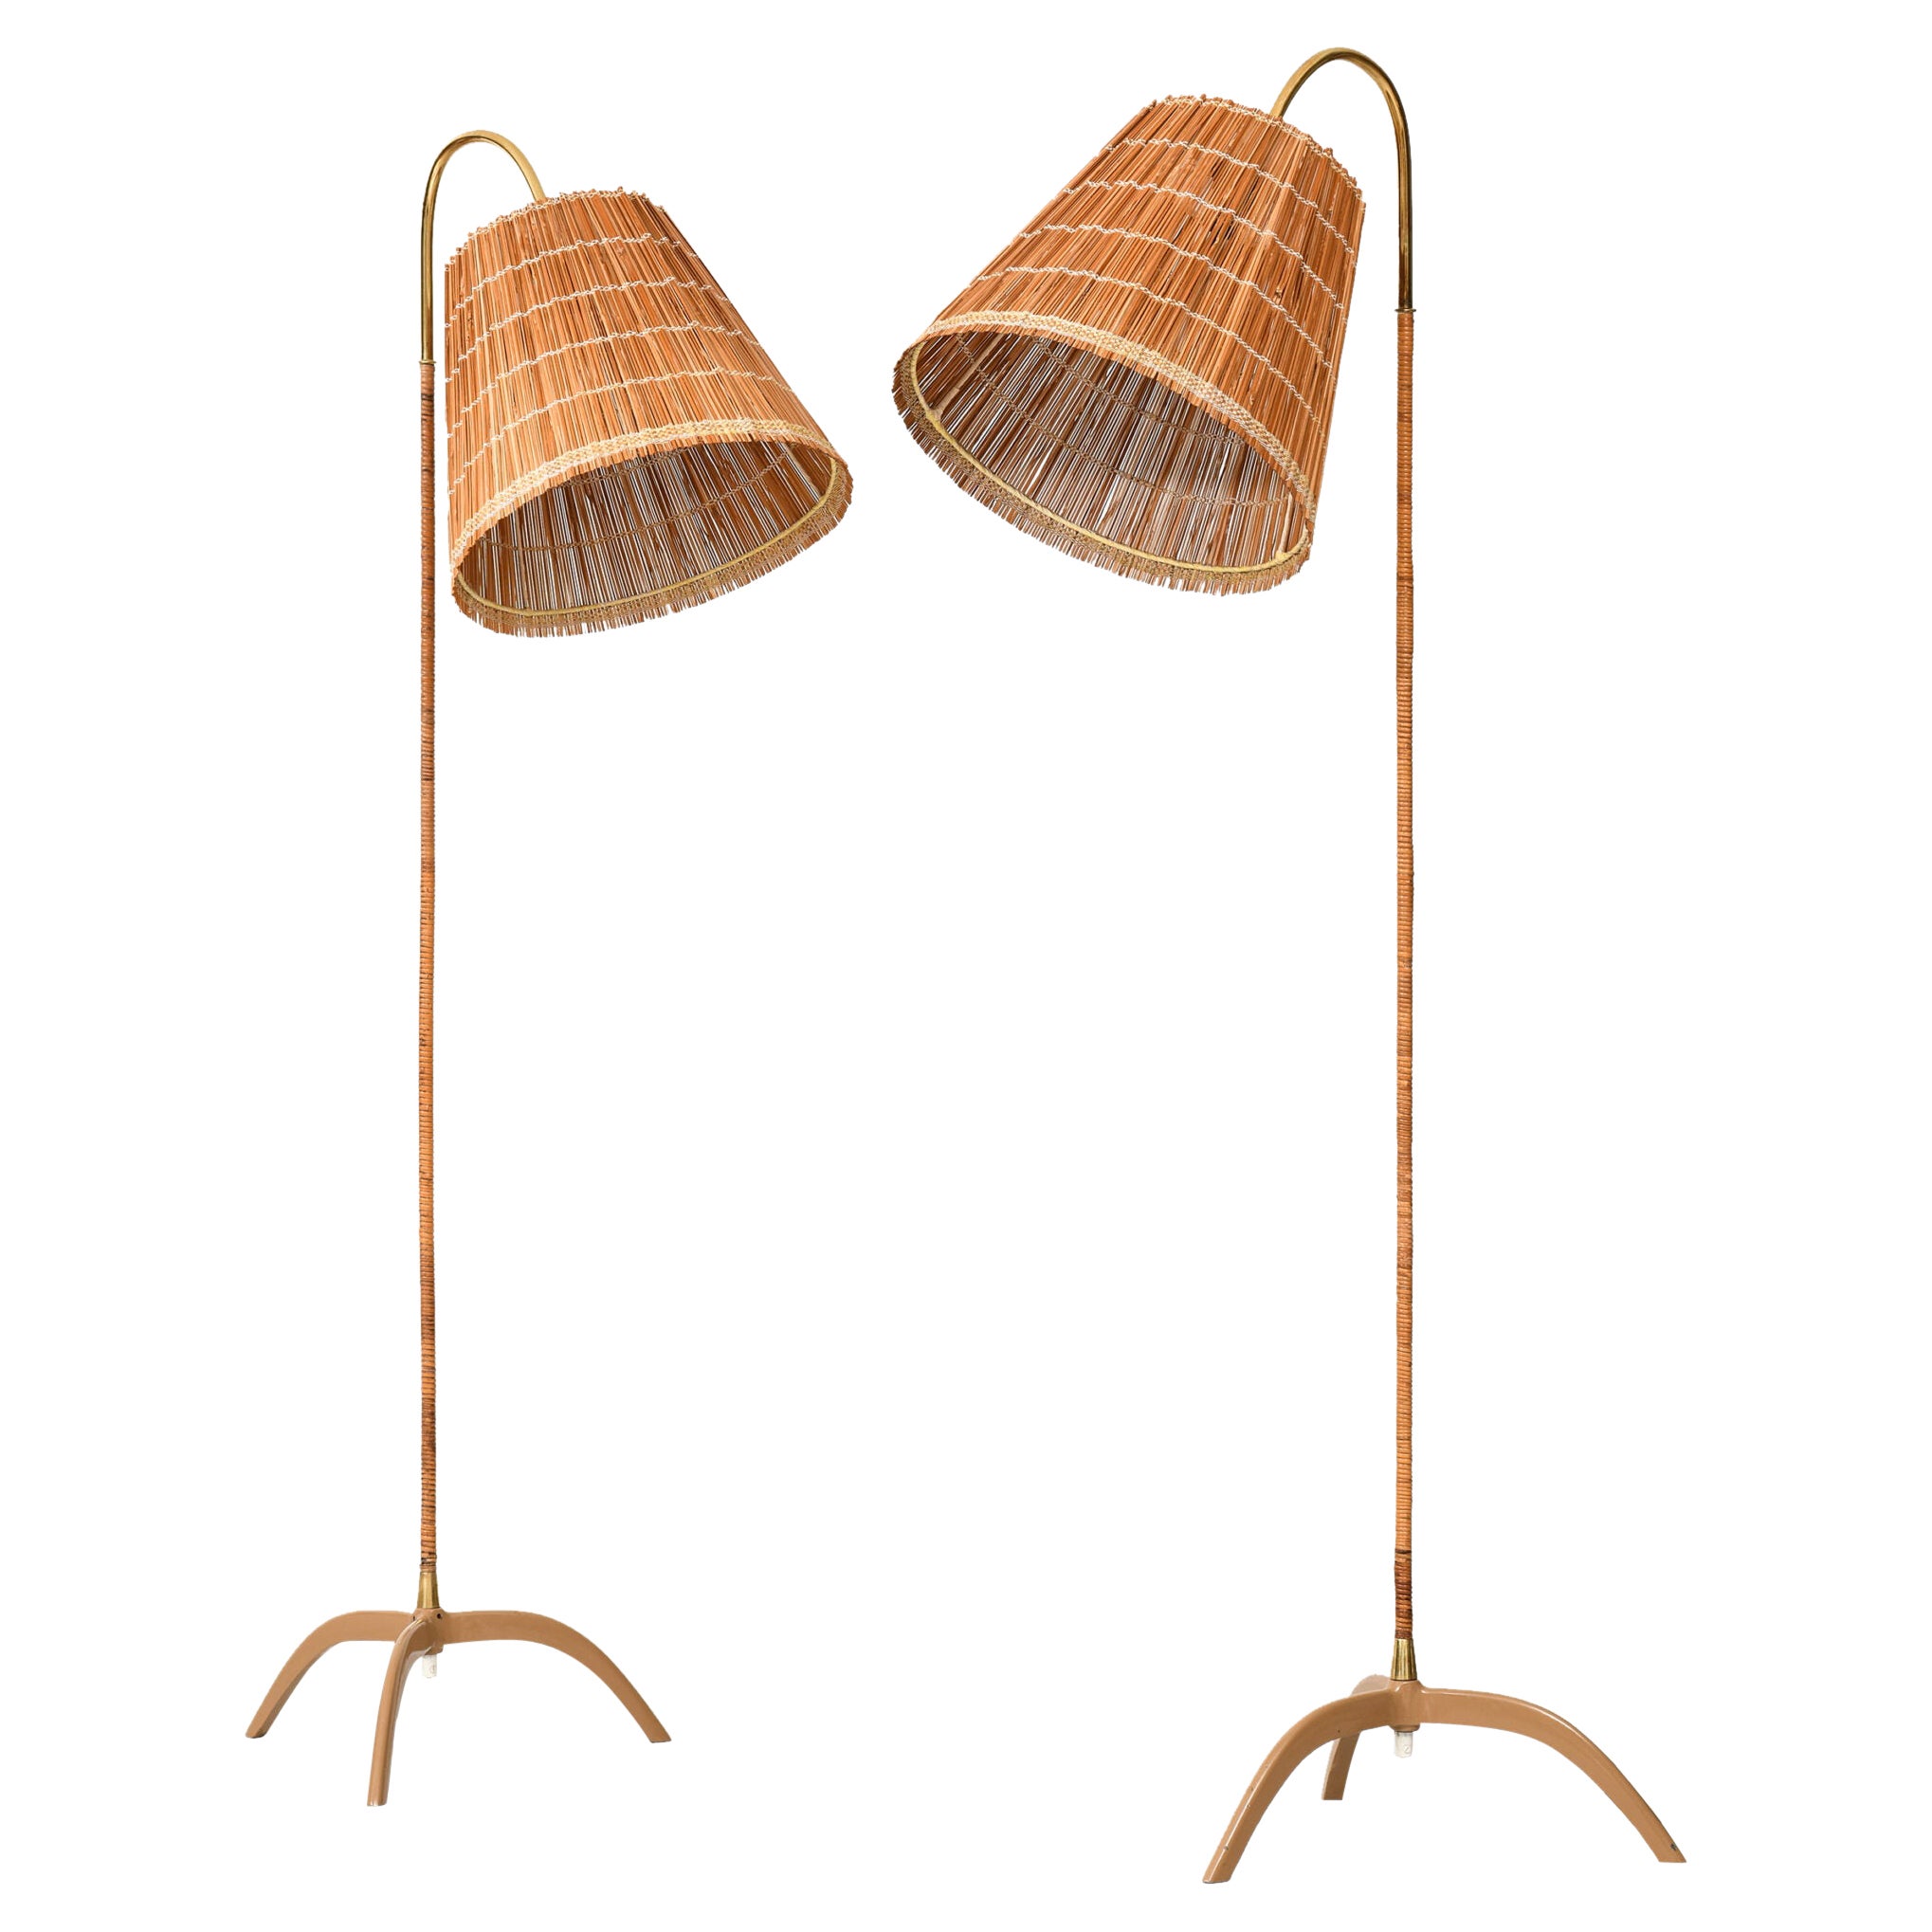 Paavo Tynell Floor Lamps Model 9609 Produced by Taito Oy in Finland